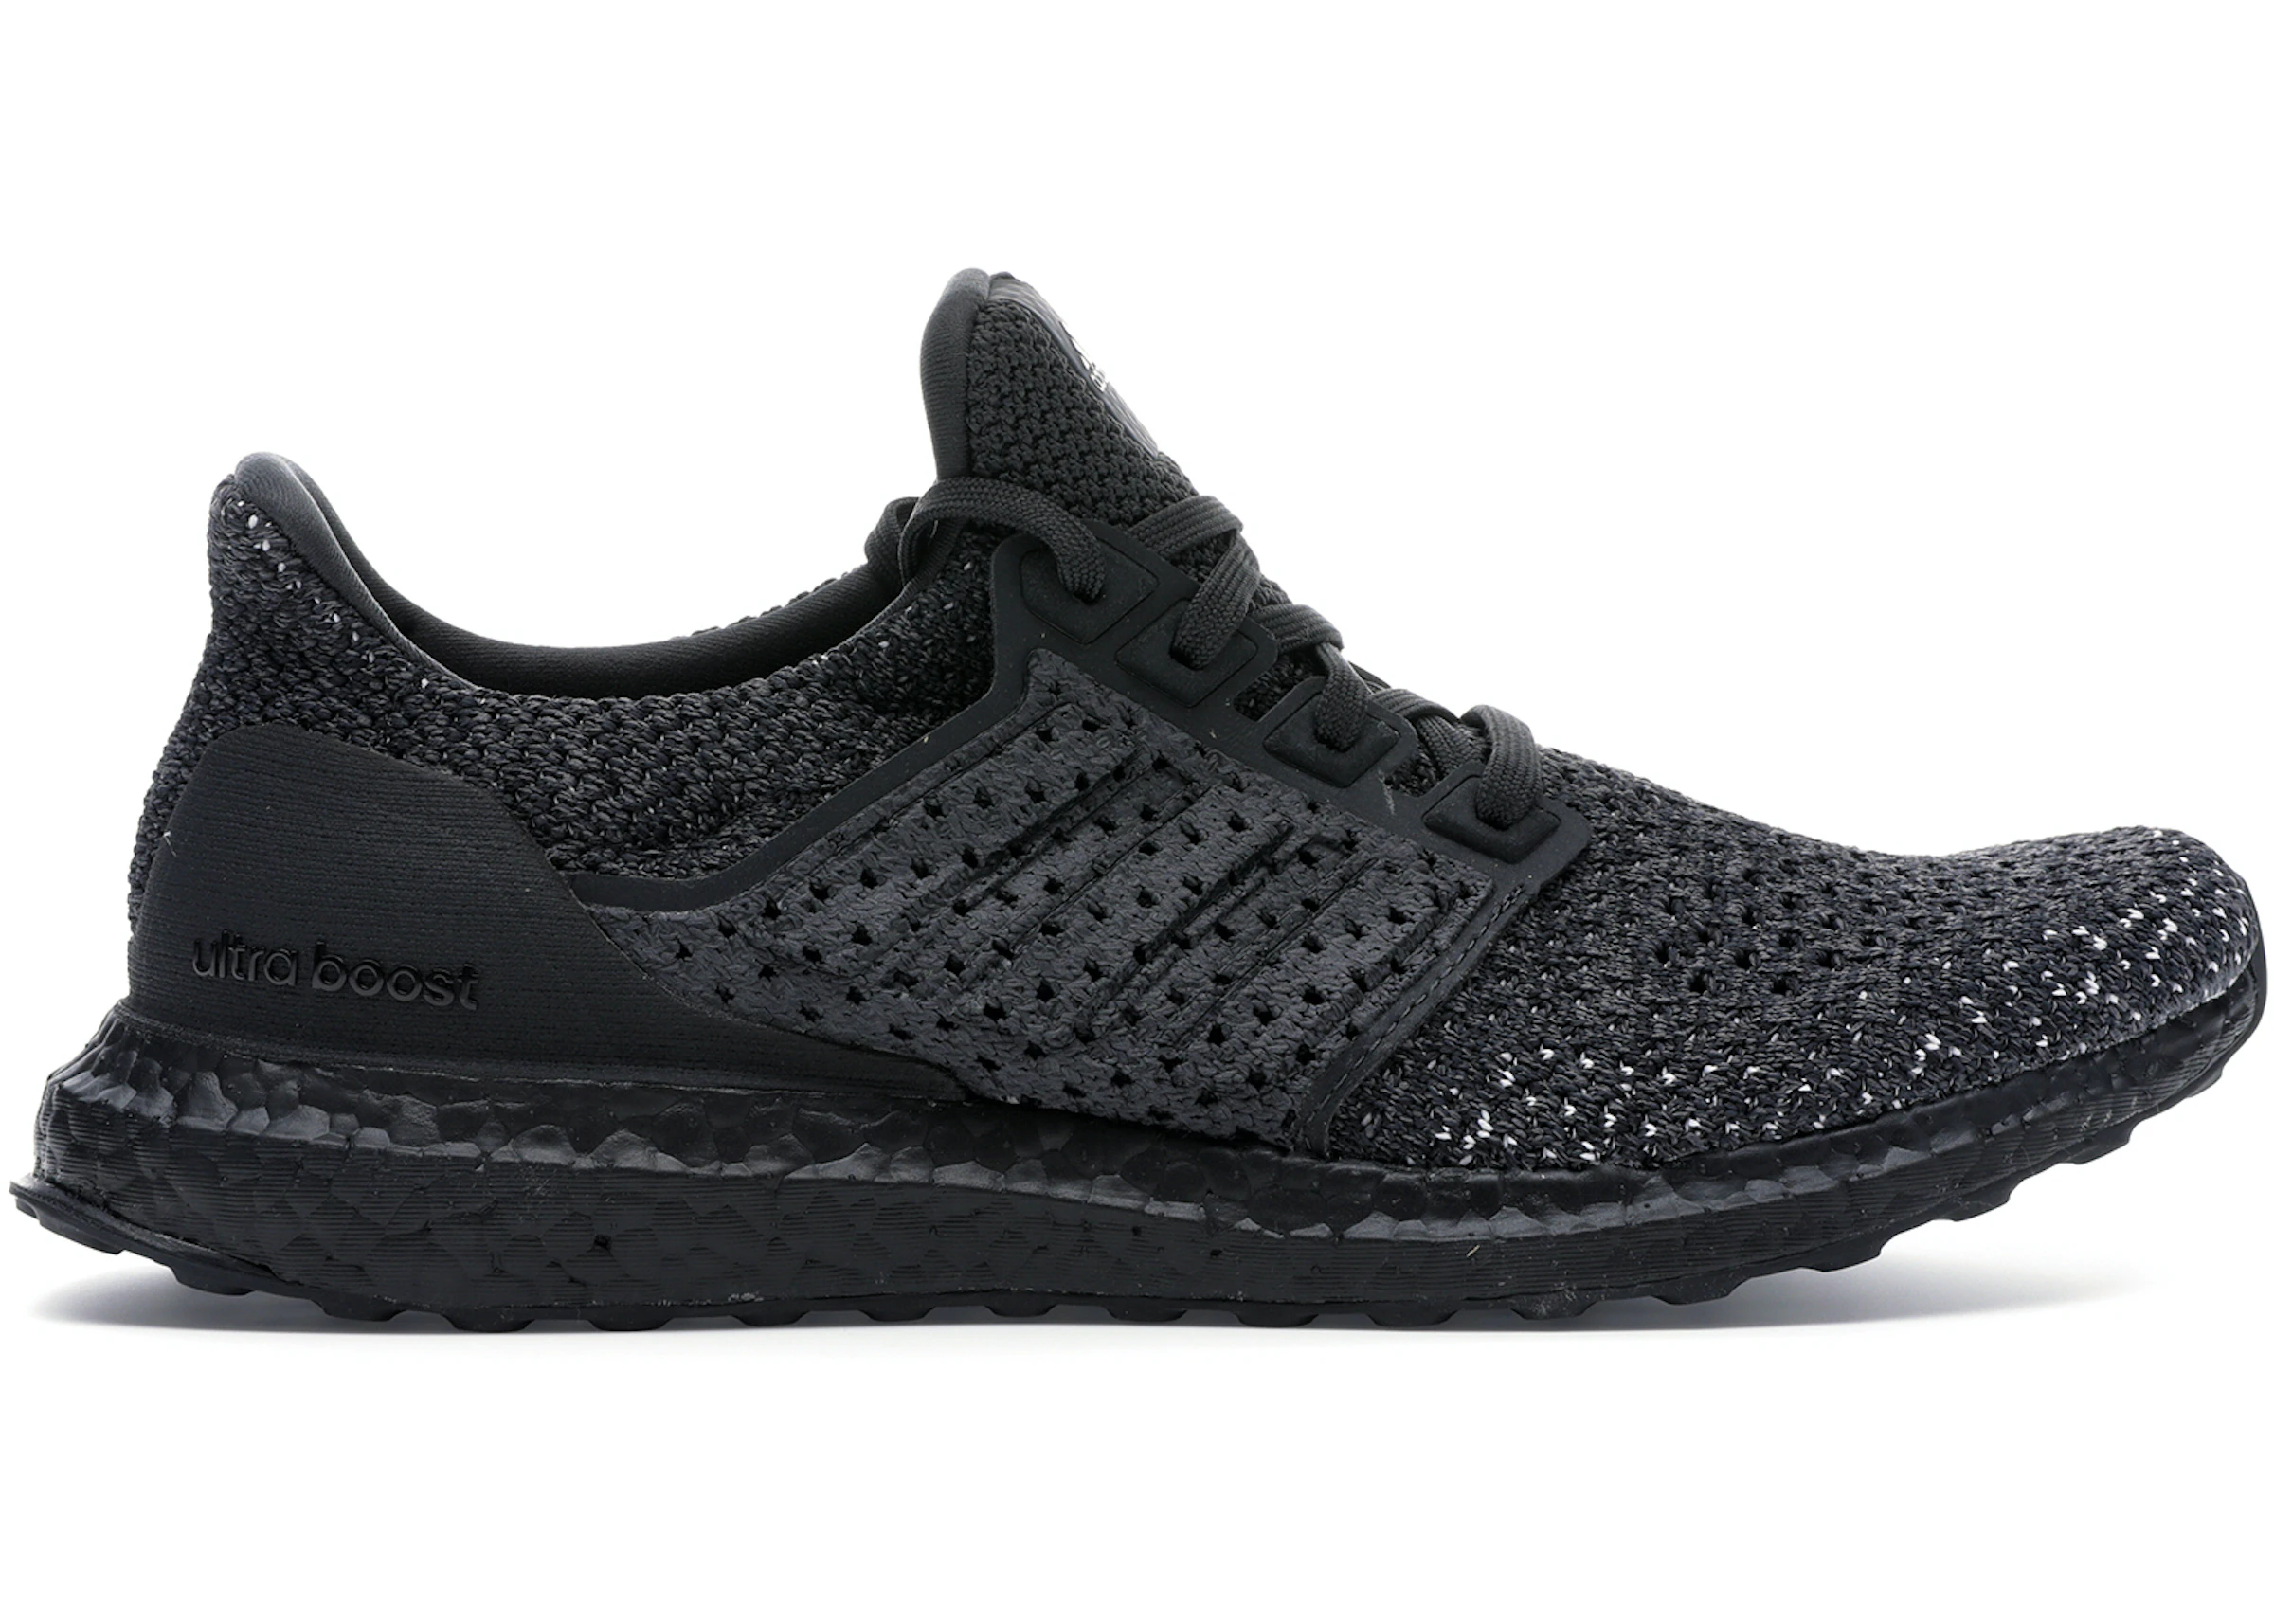 shield prevent Absay adidas Ultra Boost Clima Black - CQ0022 - US